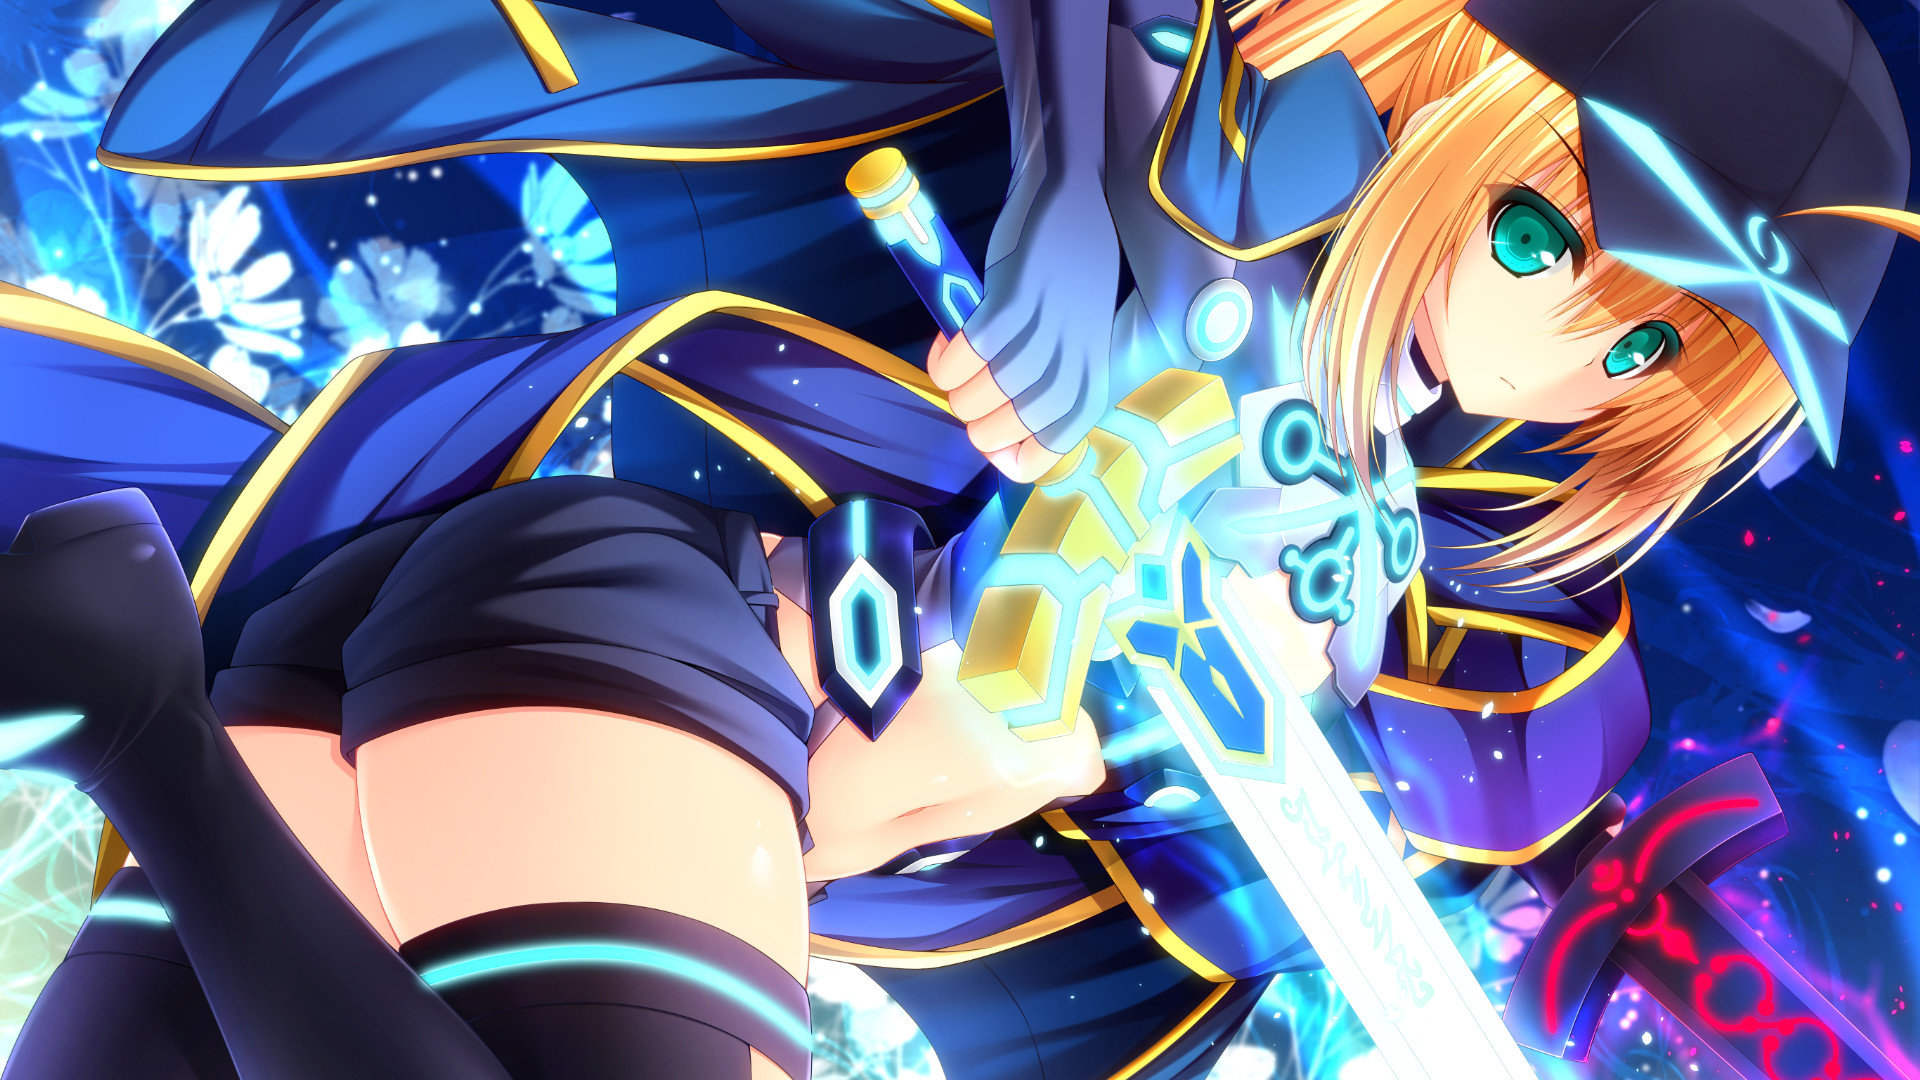 Fate Grand Order Hd Wallpaper Backgrounds Download